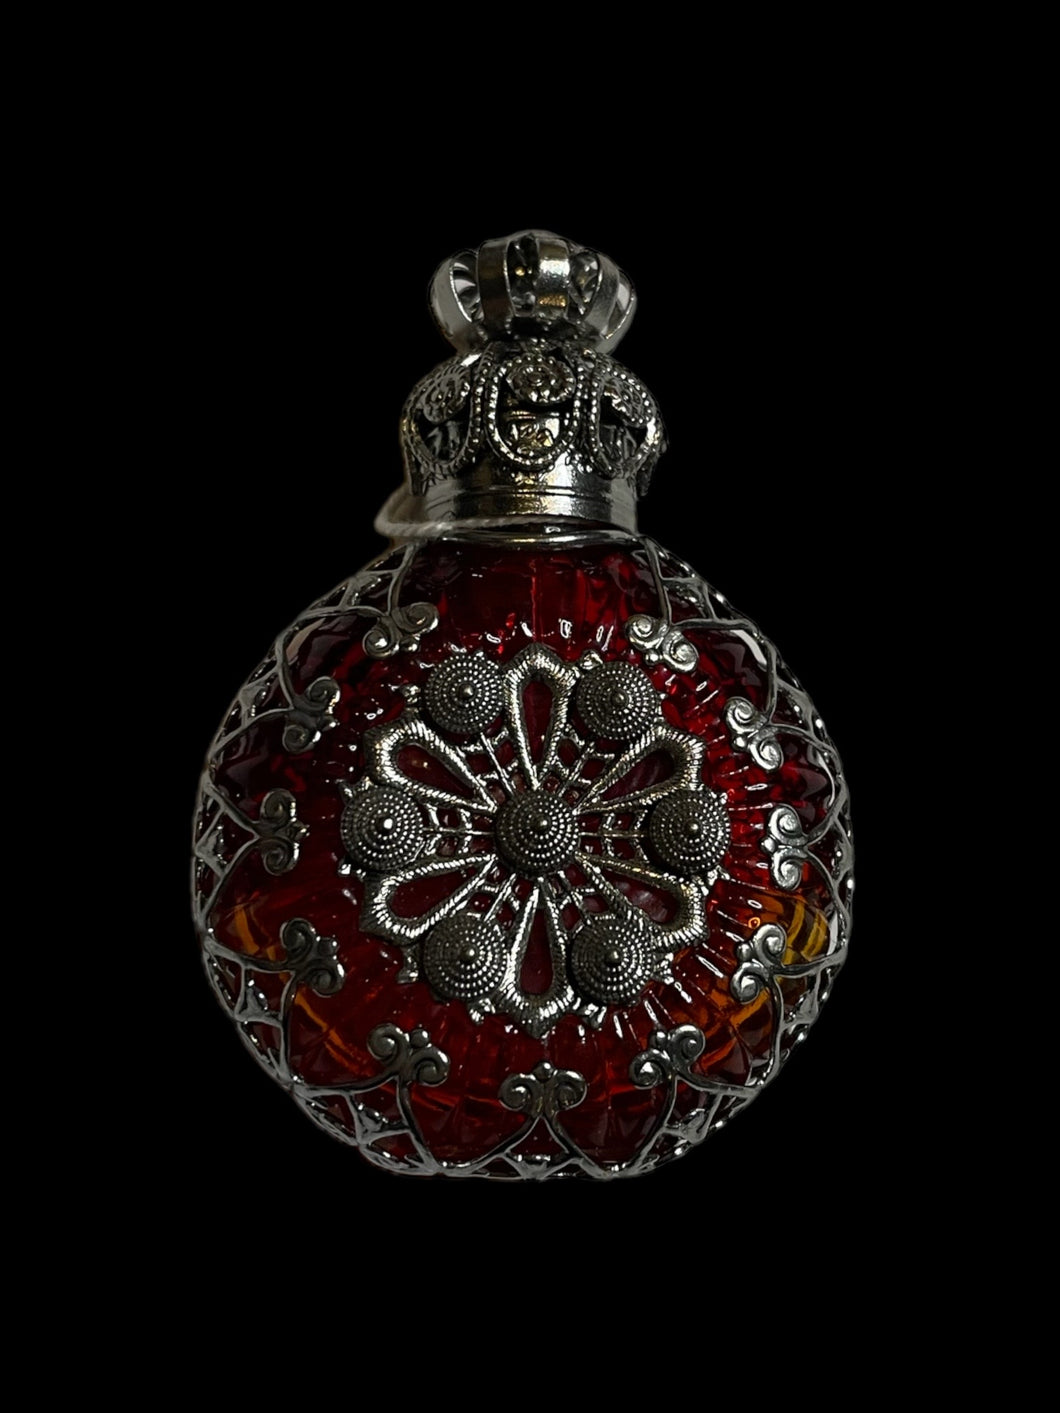 Silver-like & red ornate setting round perfume bottle